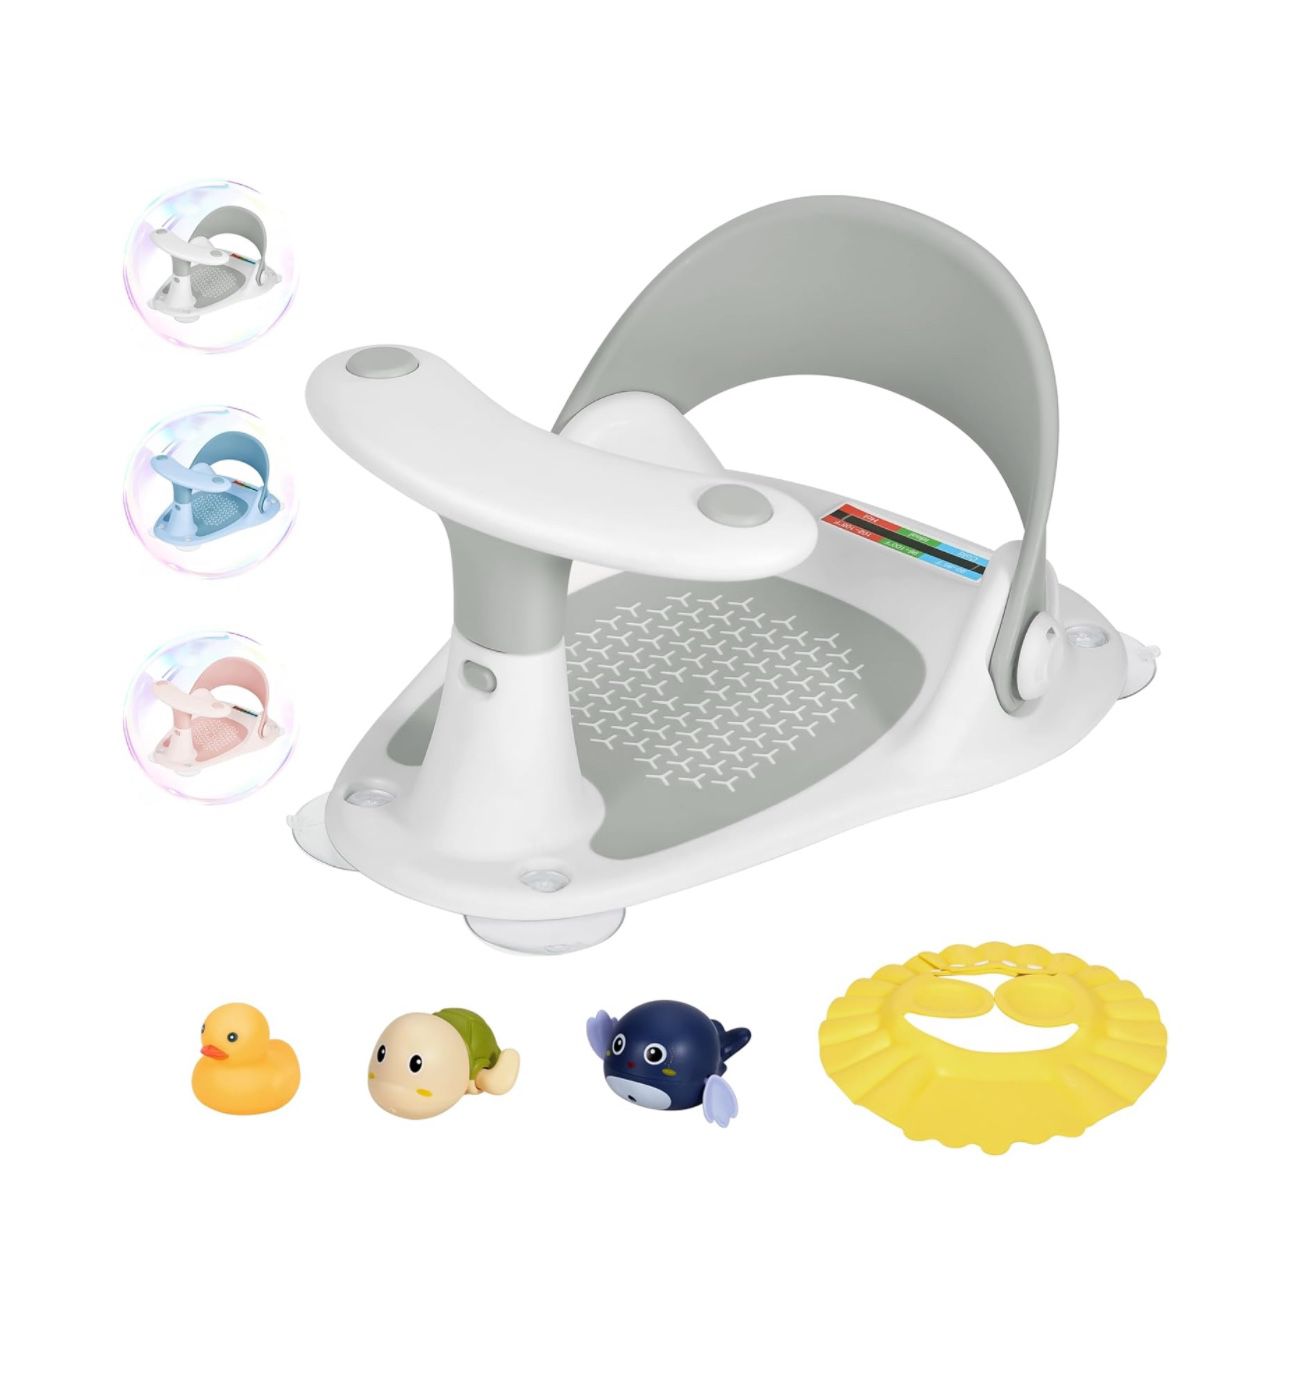 Baby Bath Seat for Babies 6 Months & Up - Infant Bathtub Seats with Thermometer for Sitting up in